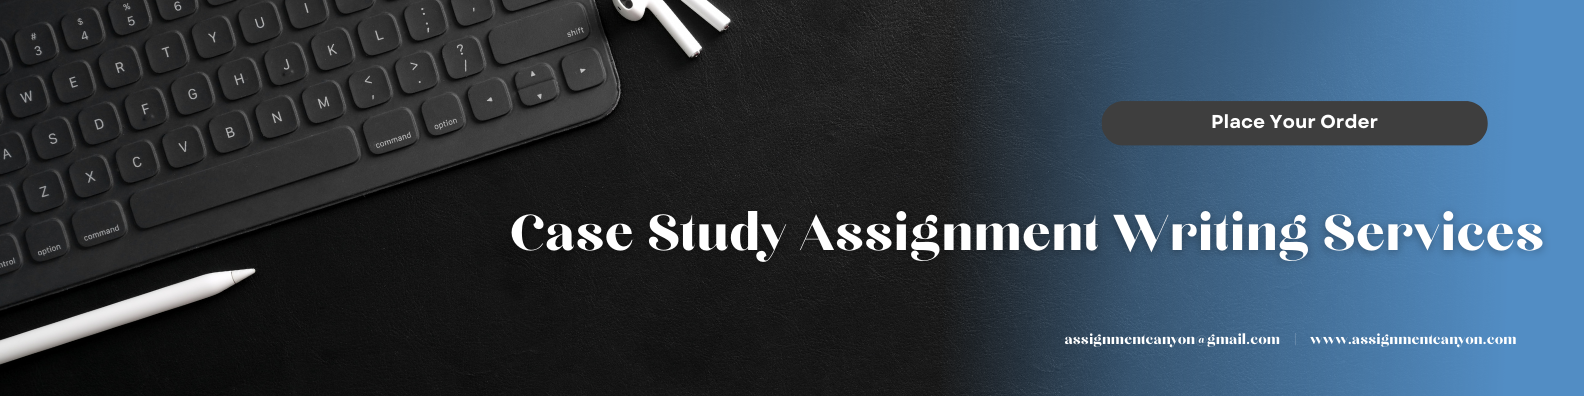 Get the best case study assignment writing services from Assignment Canyon - 13.50 USD per page